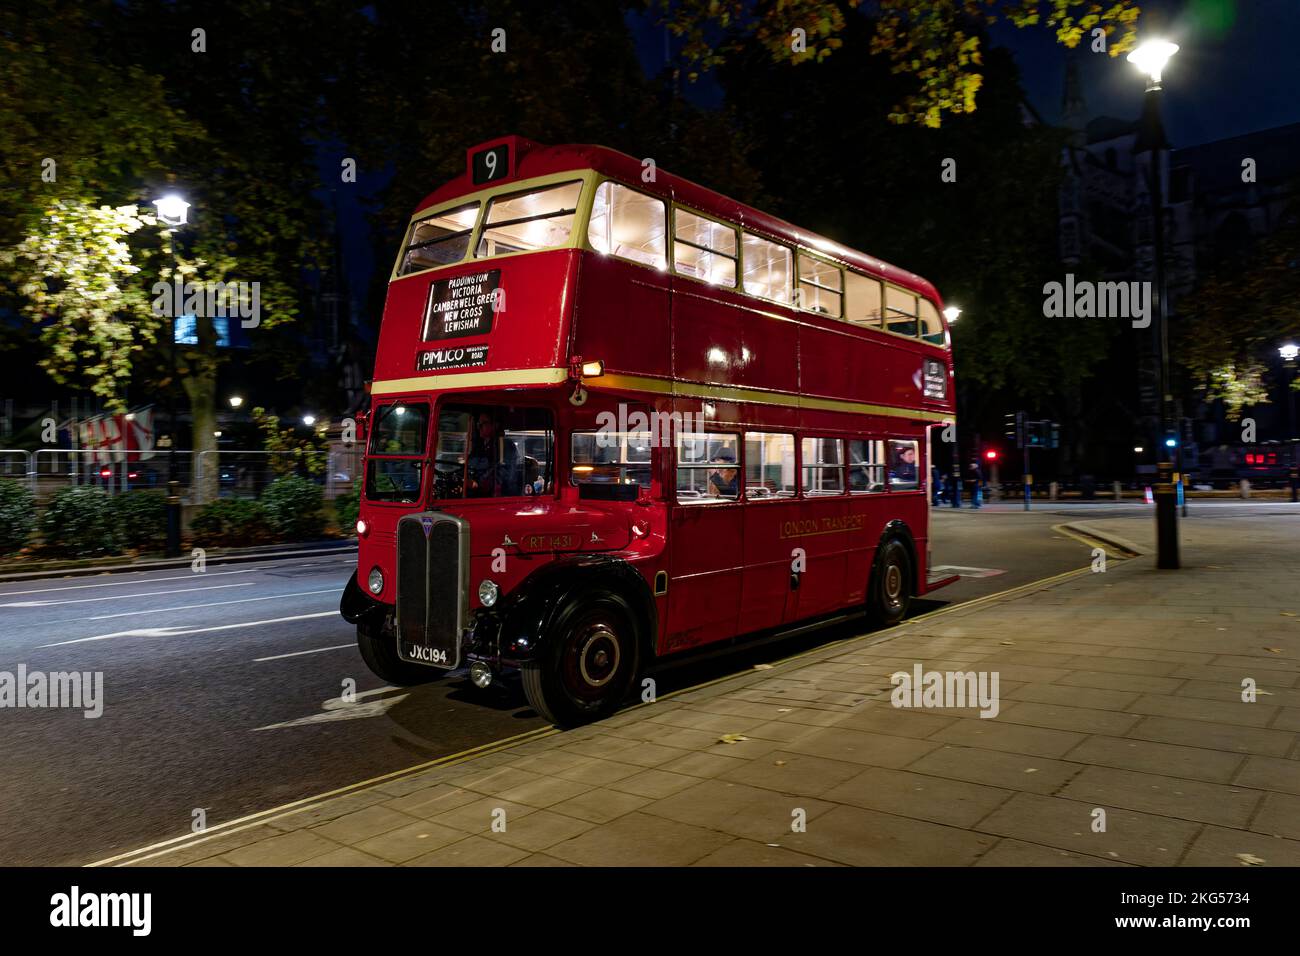 Classic double decker red London bus parked in Parliament Square in London at night Stock Photo